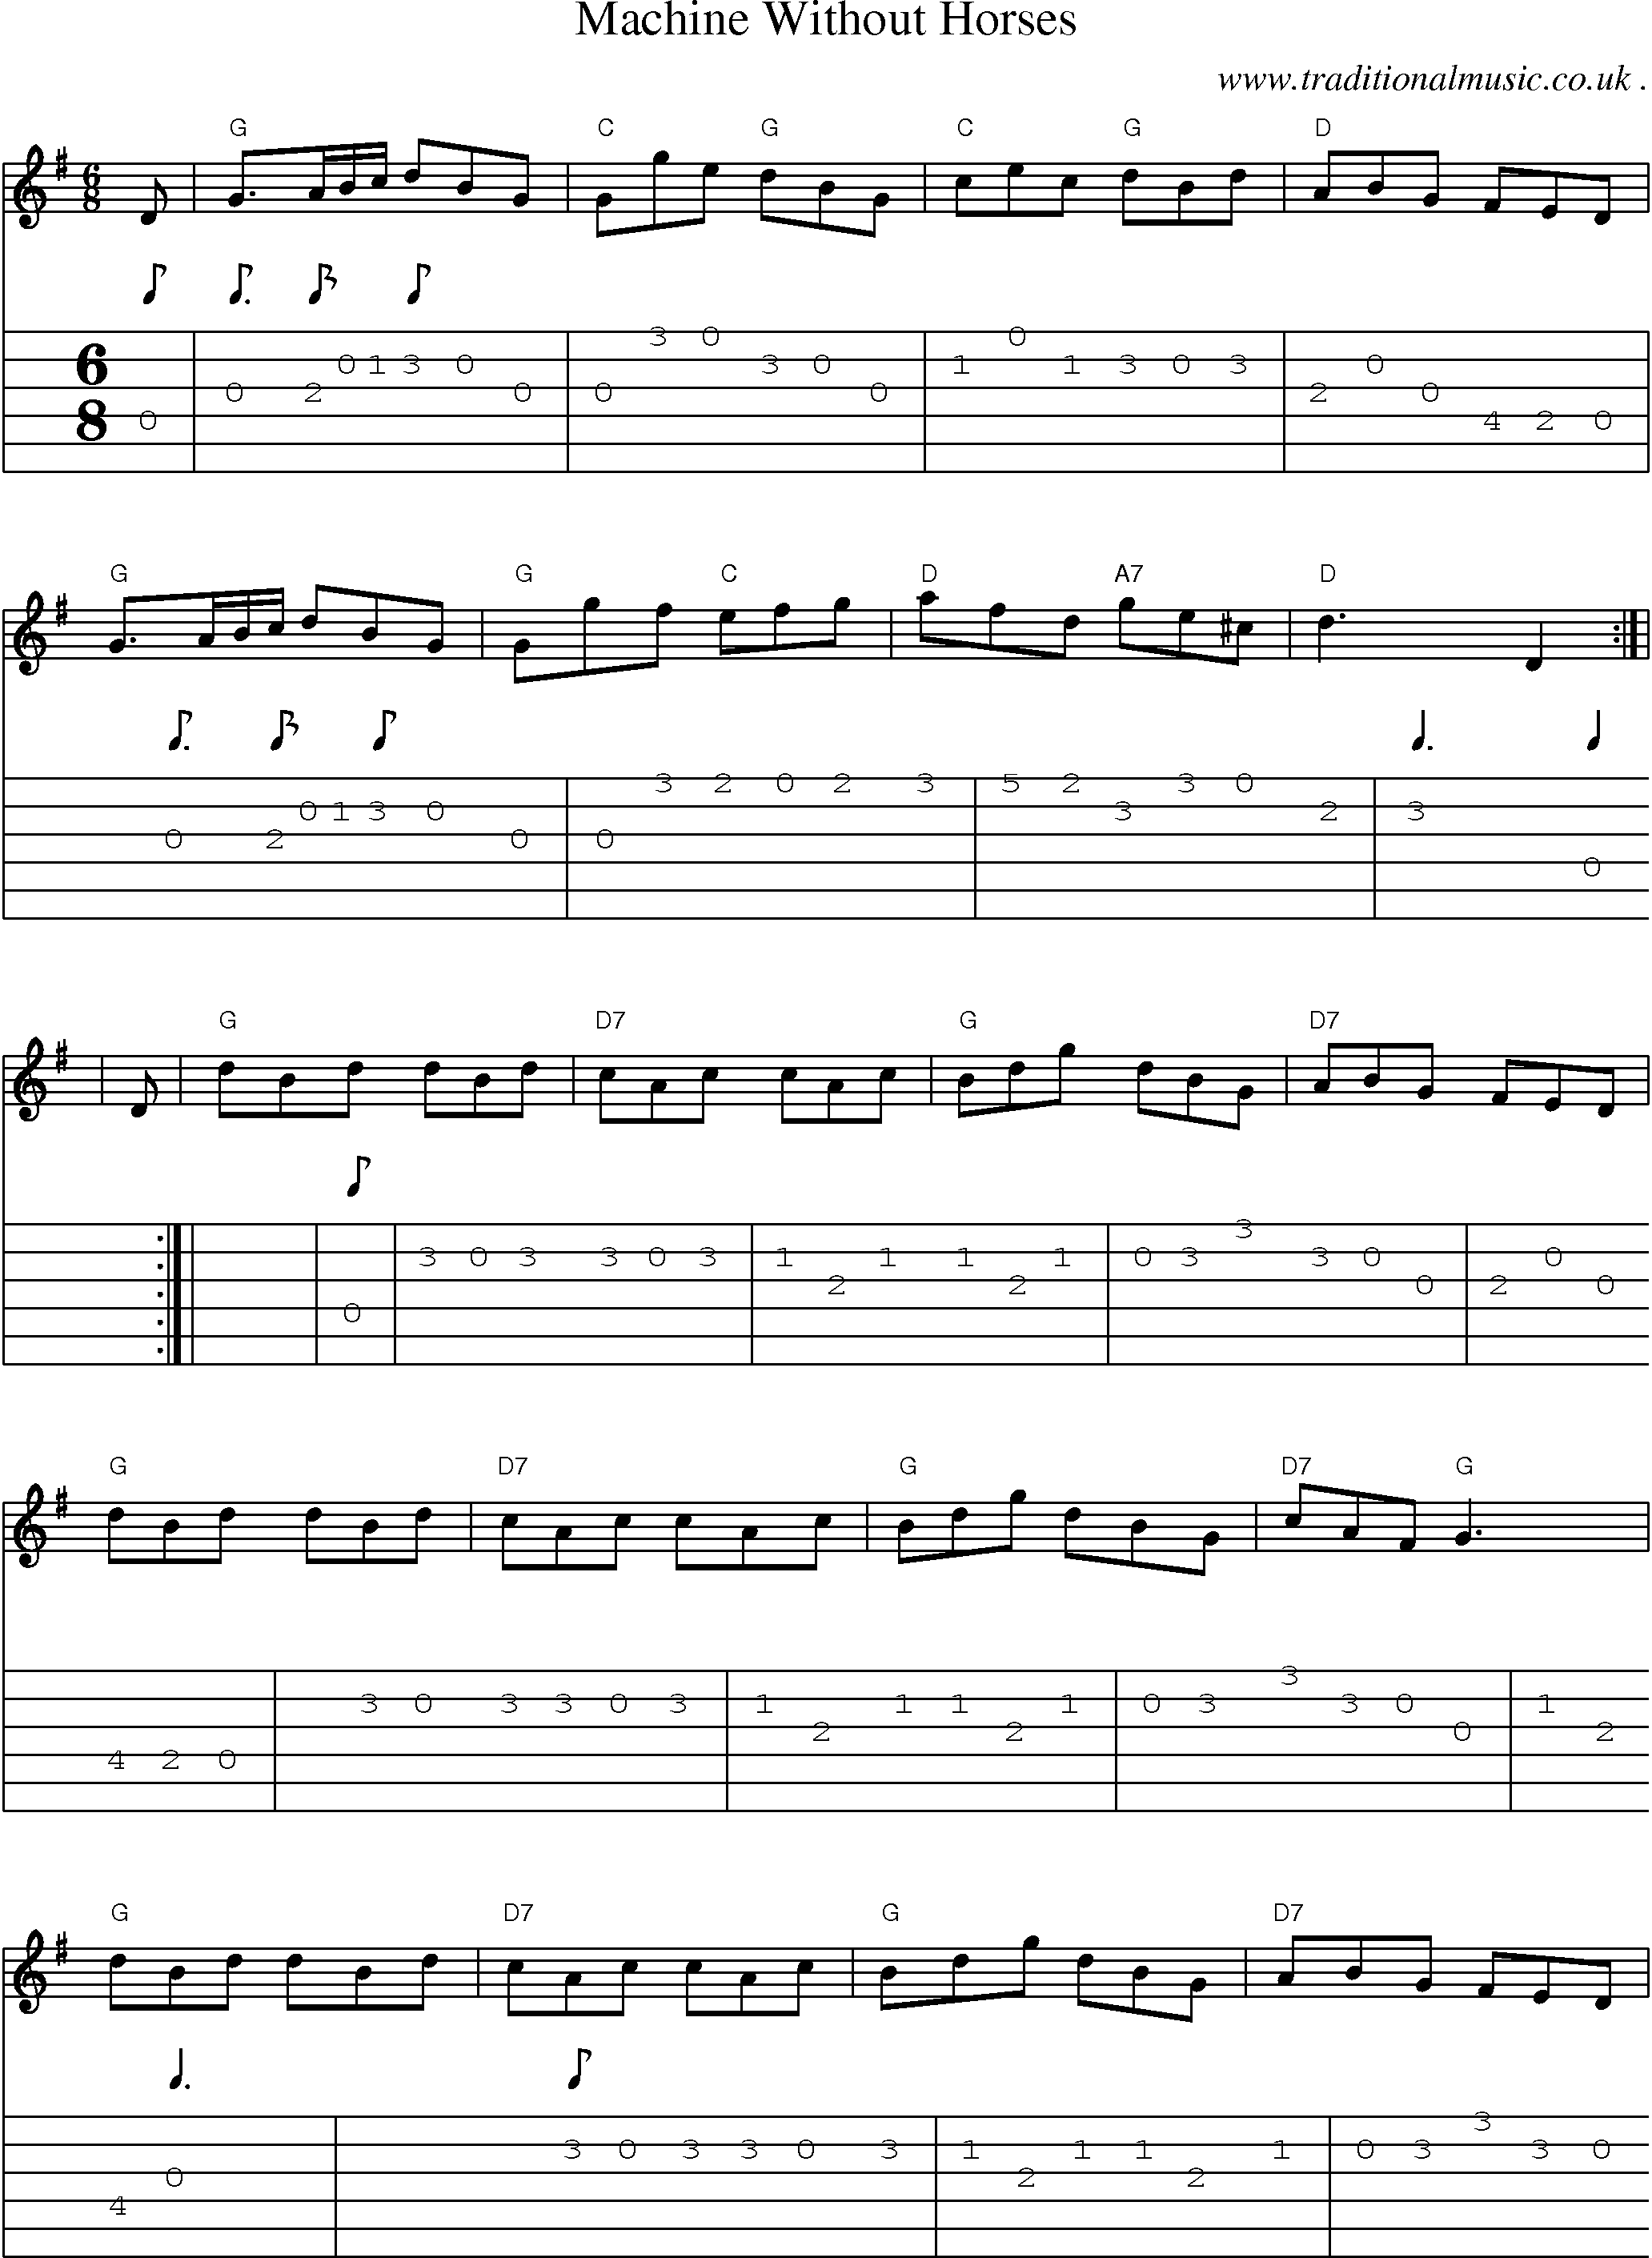 Sheet-music  score, Chords and Guitar Tabs for Machine Without Horses